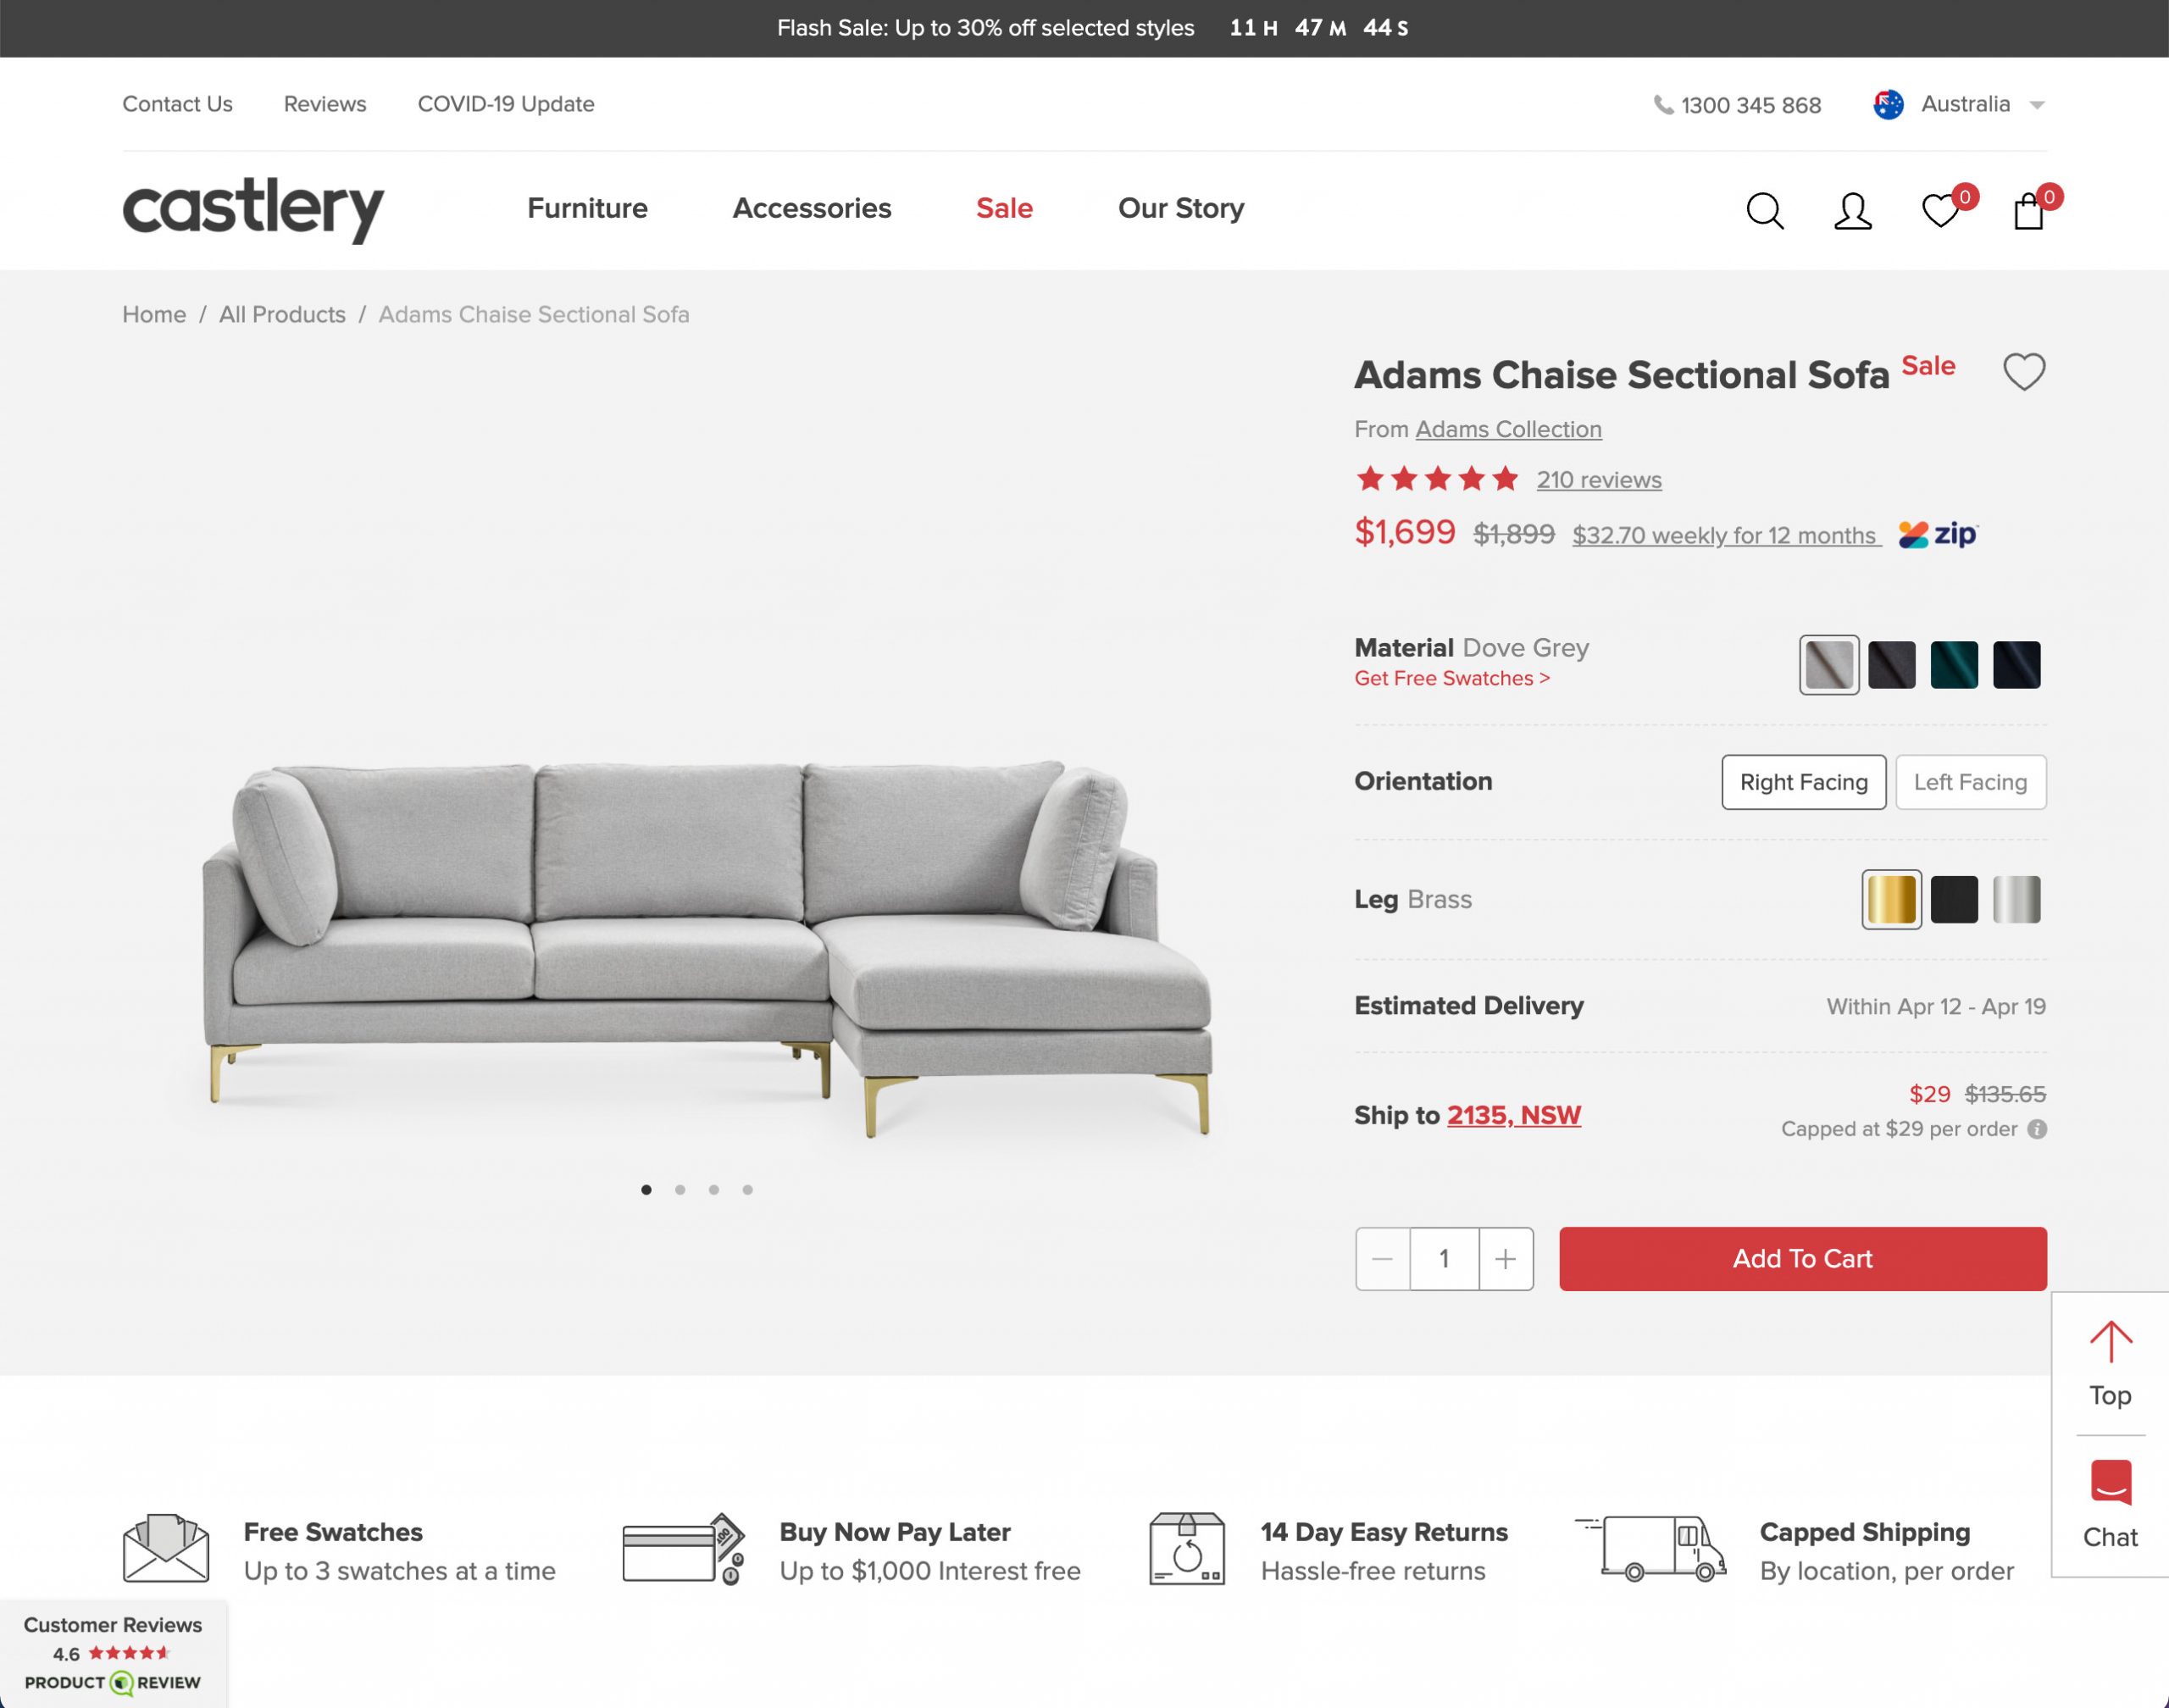 best-ecommerce-product-page-example-for-furniture-industry